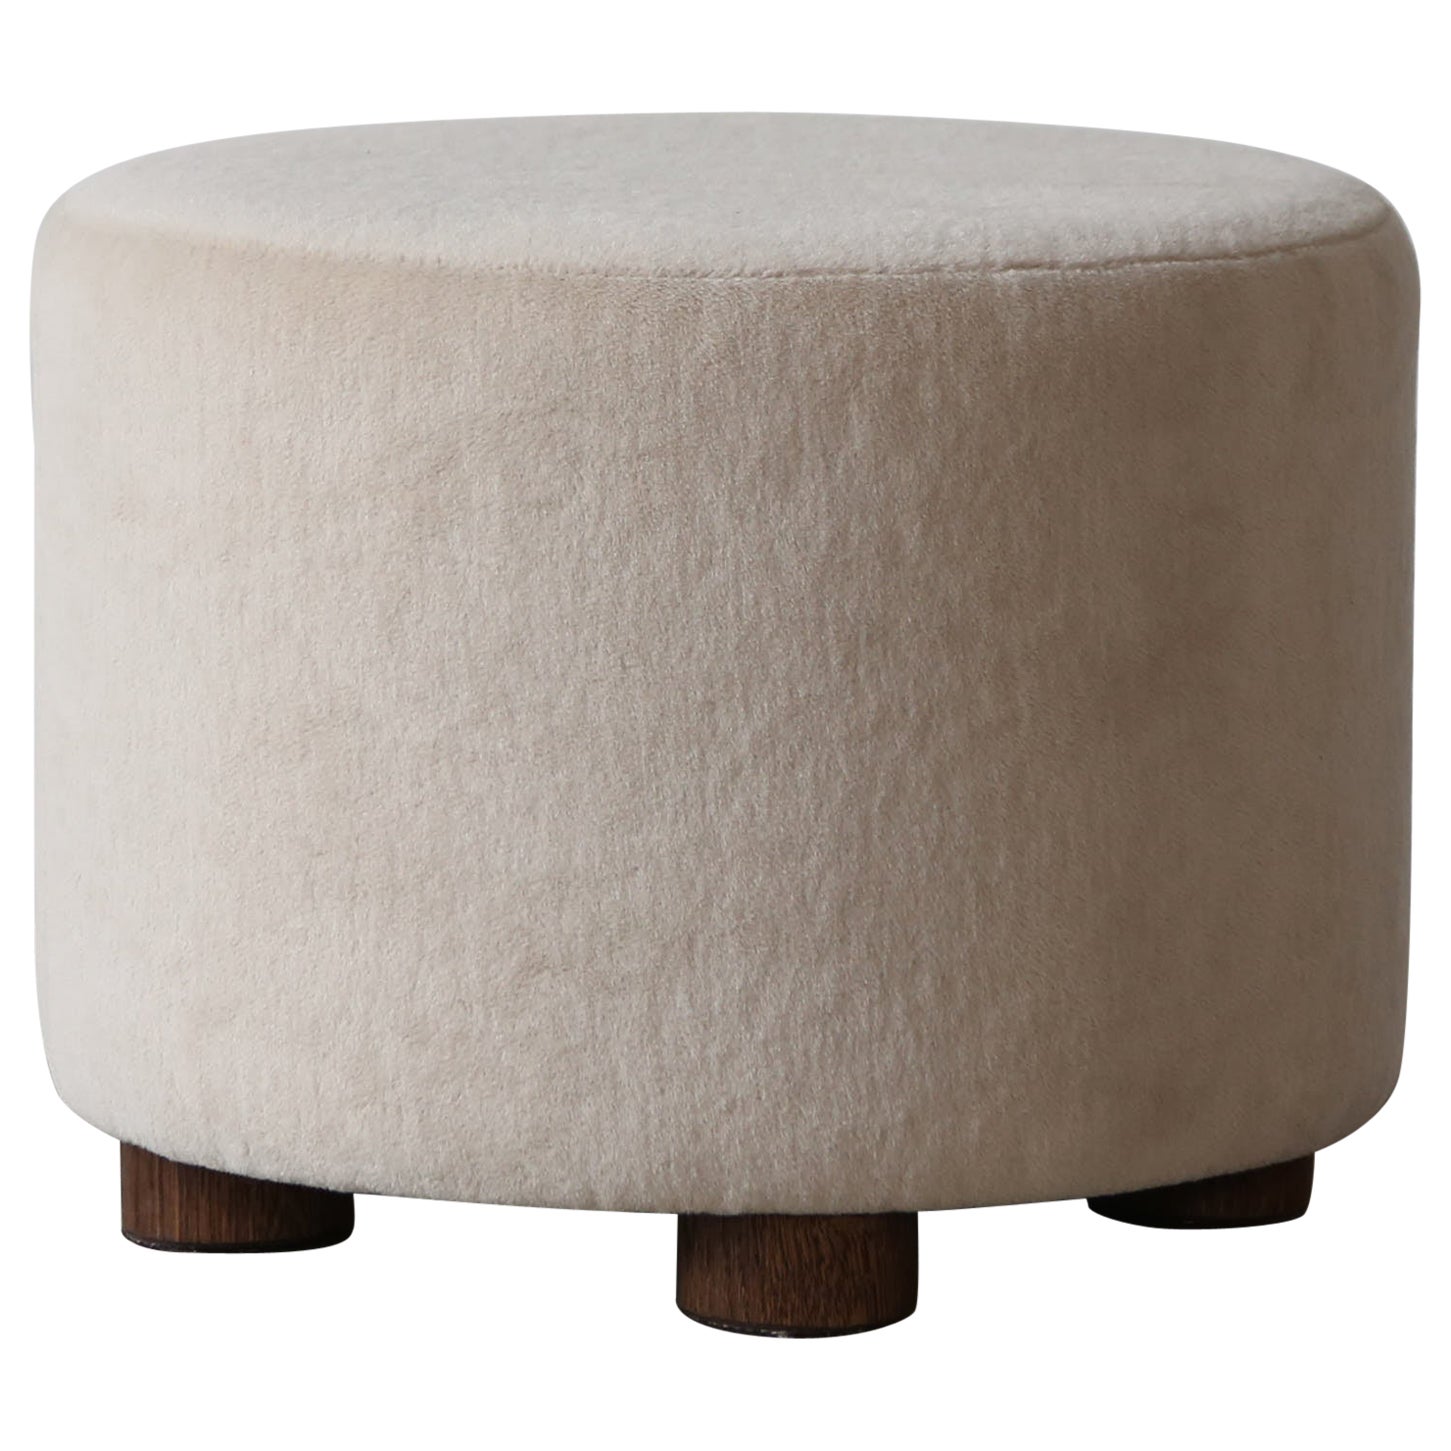 Low Round Ottoman / Footstool in Pure Alpaca